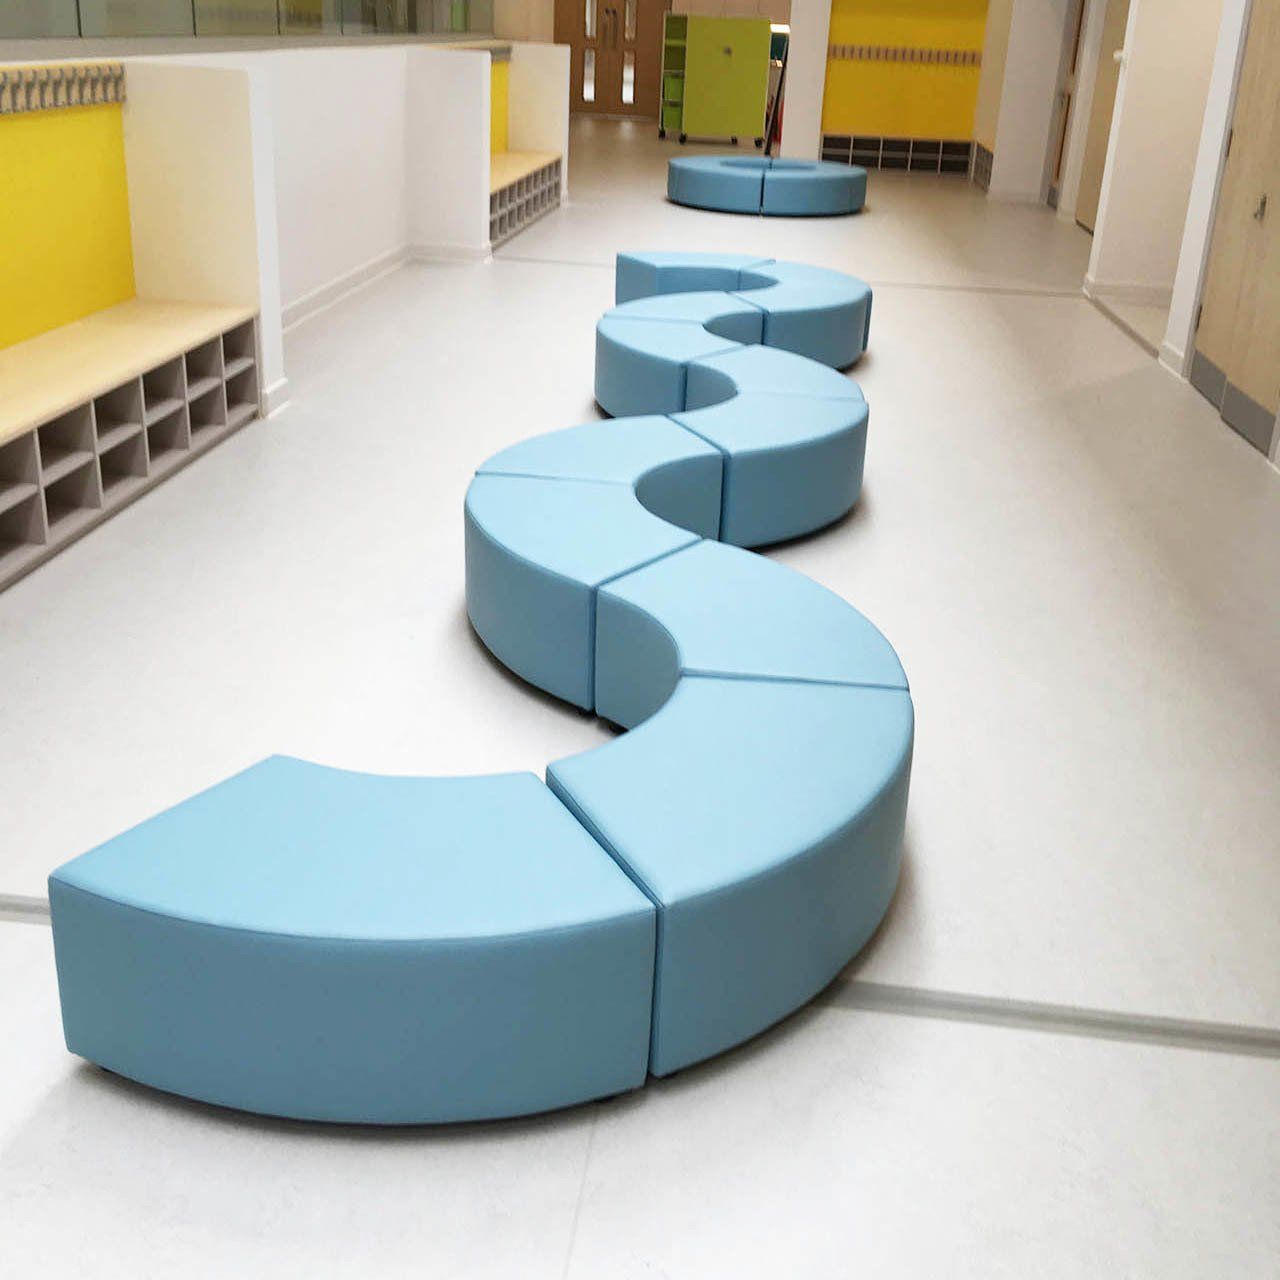 curved modular seating stools for changing room